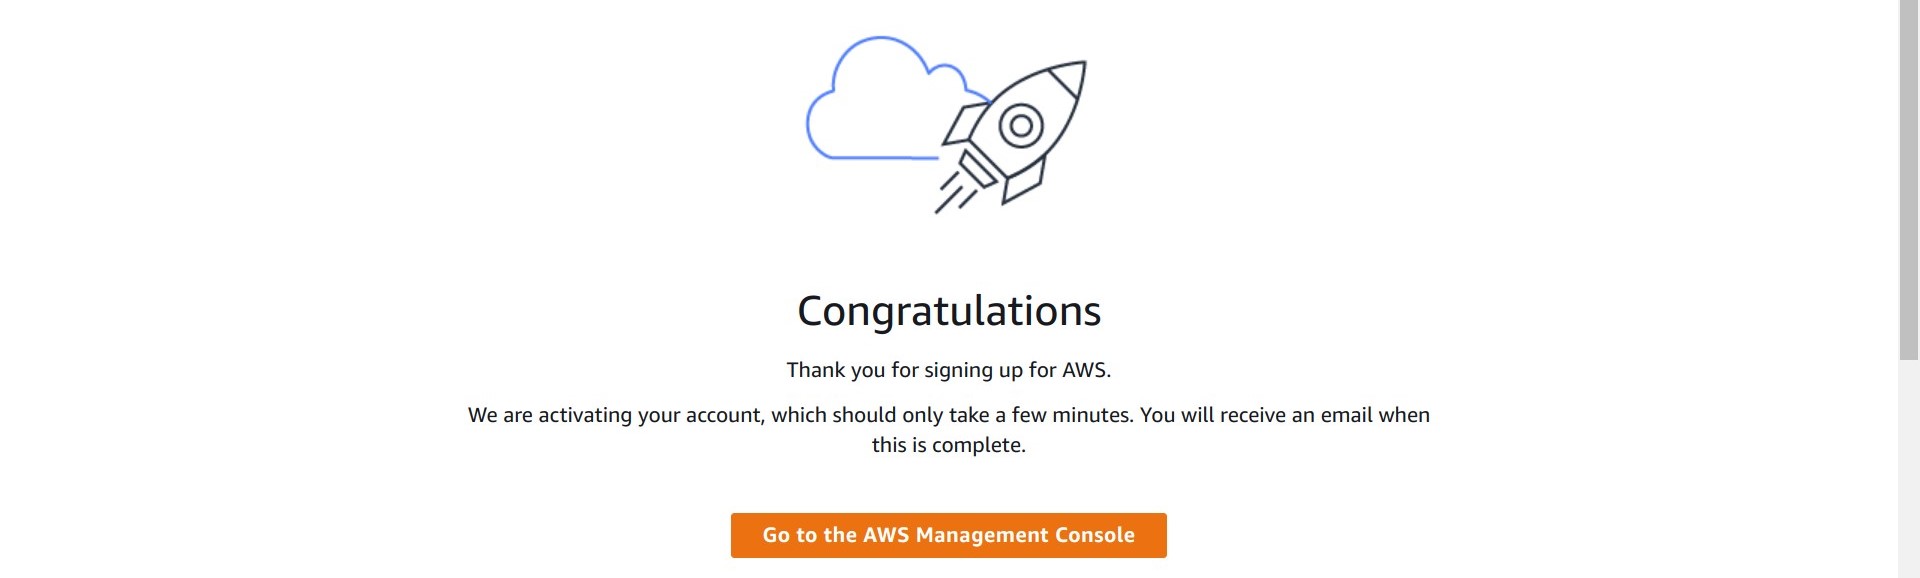 Screen shot of AWS sign up page in a browser showing the Congratulations page and a button to Go to the AWS Management Console